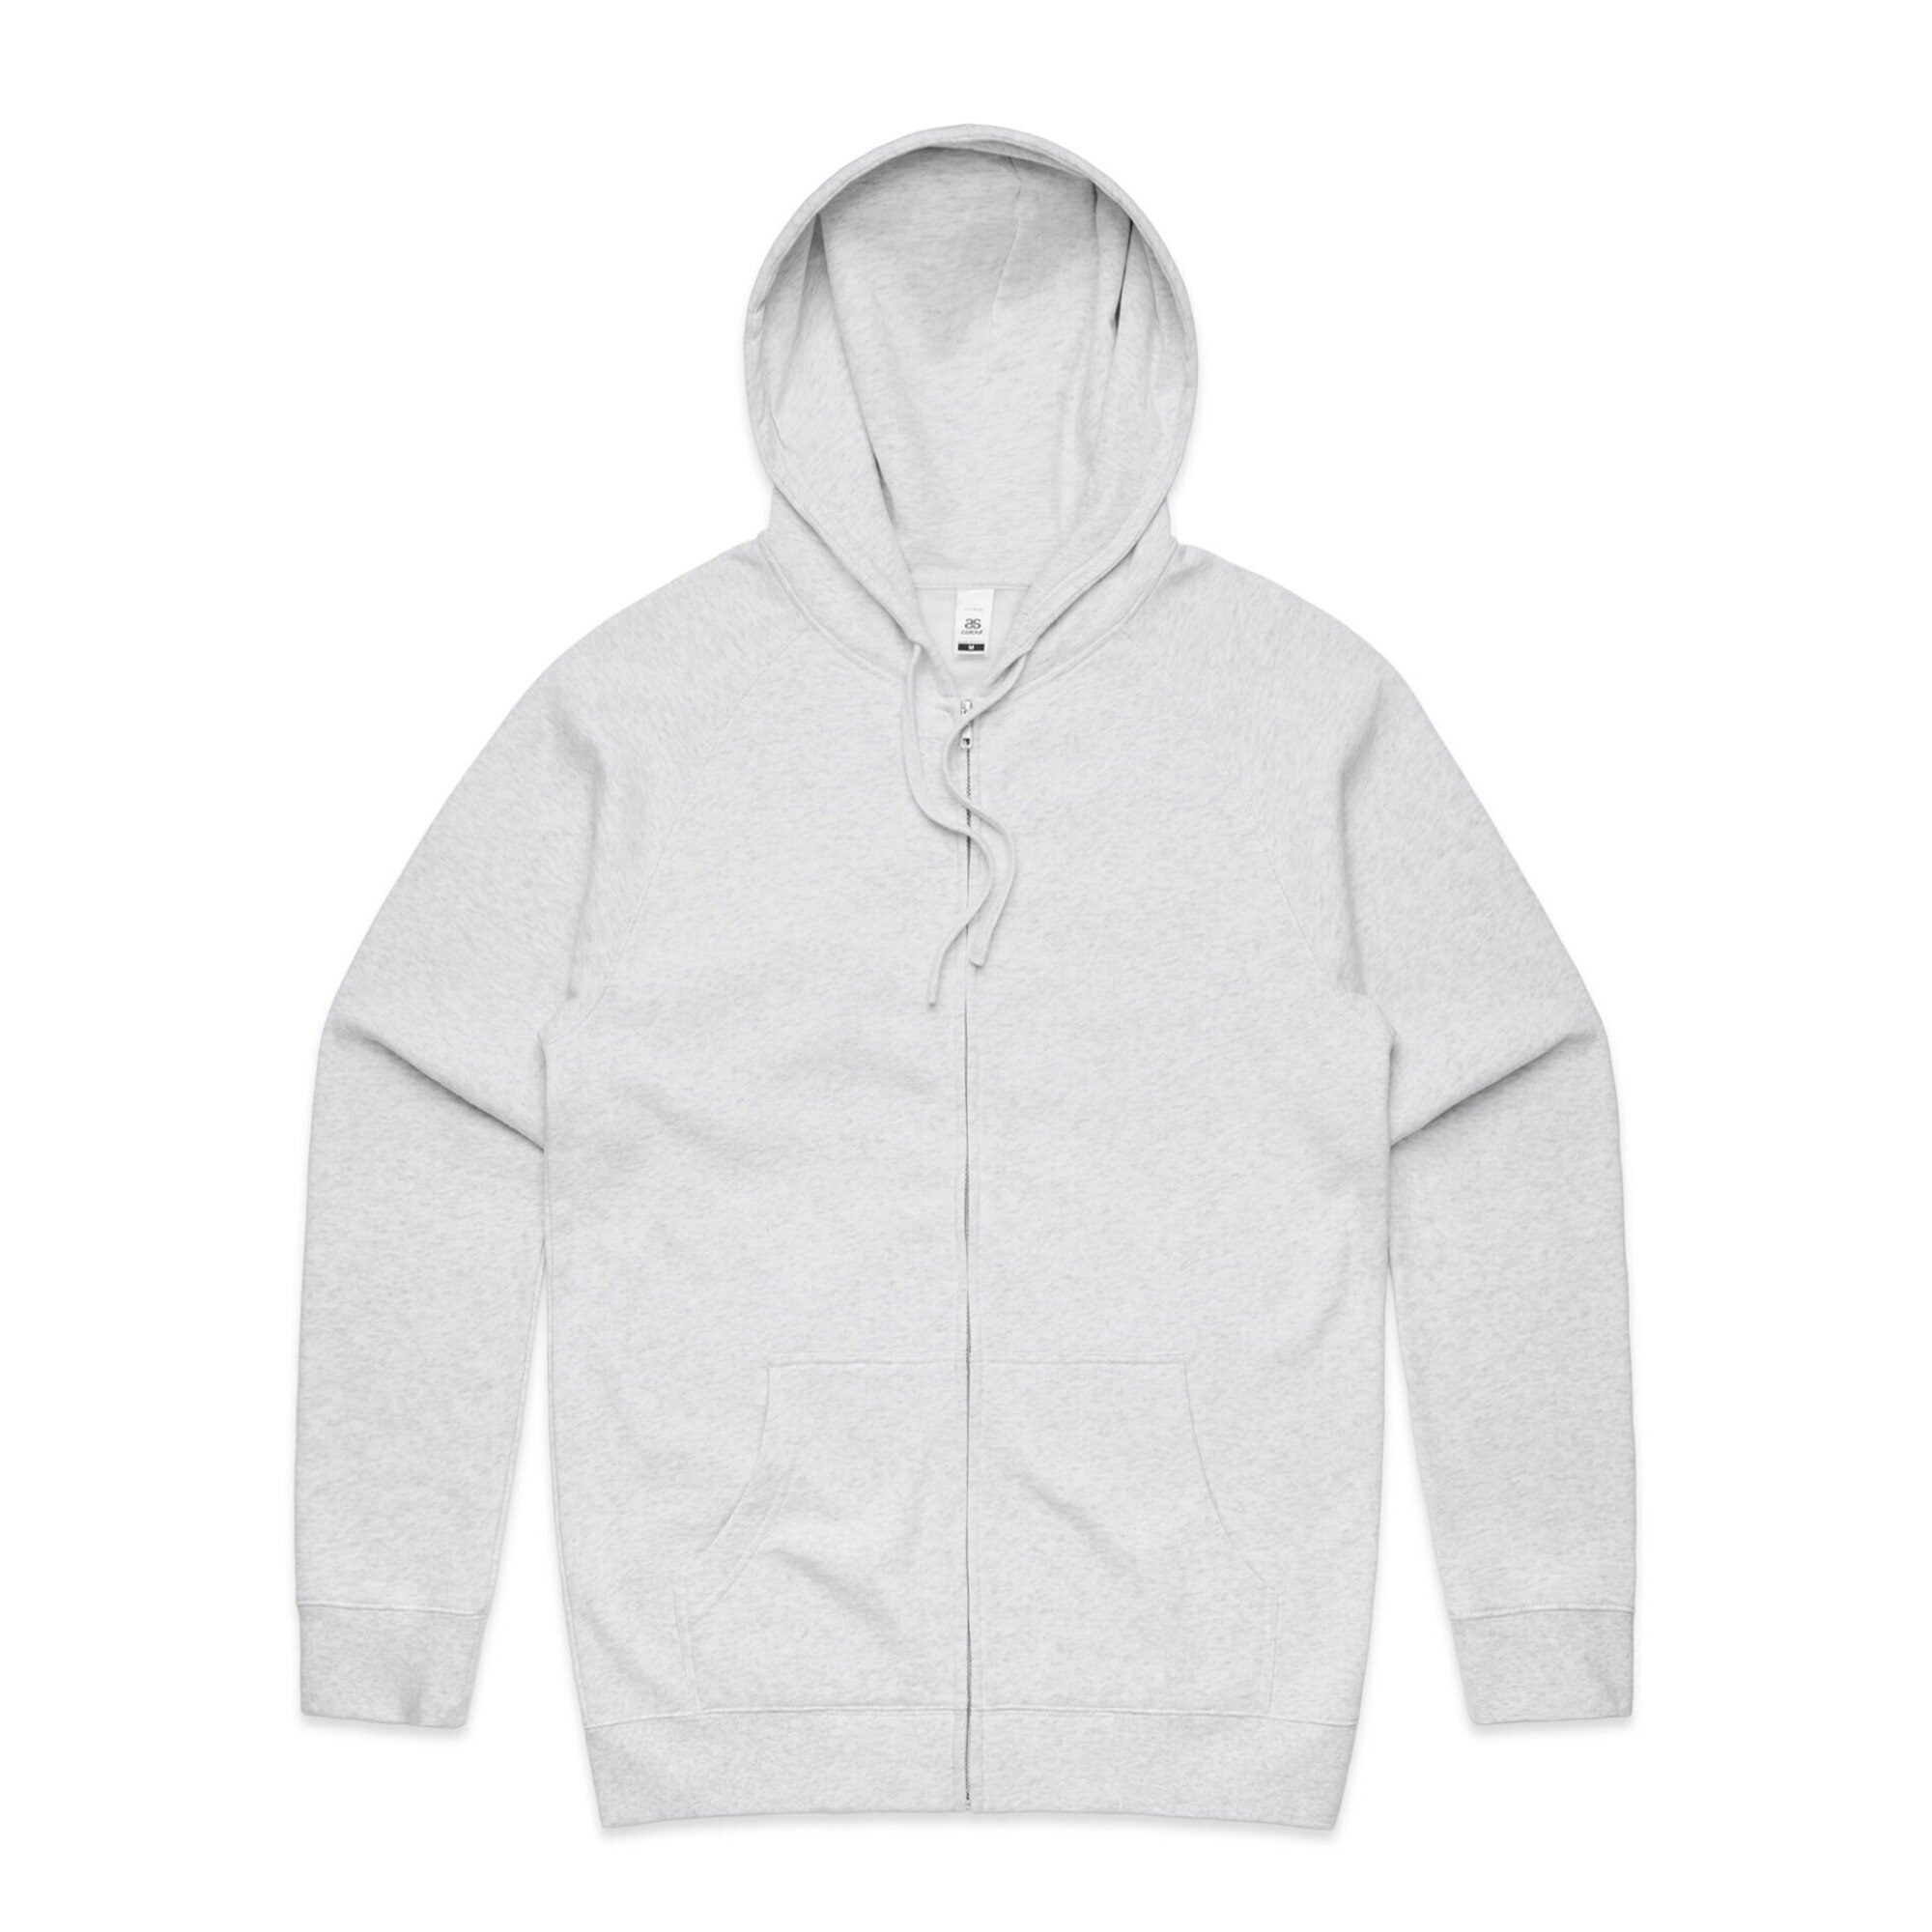 5103_AS_Mens-Official-Zip-Hood_White-Marle